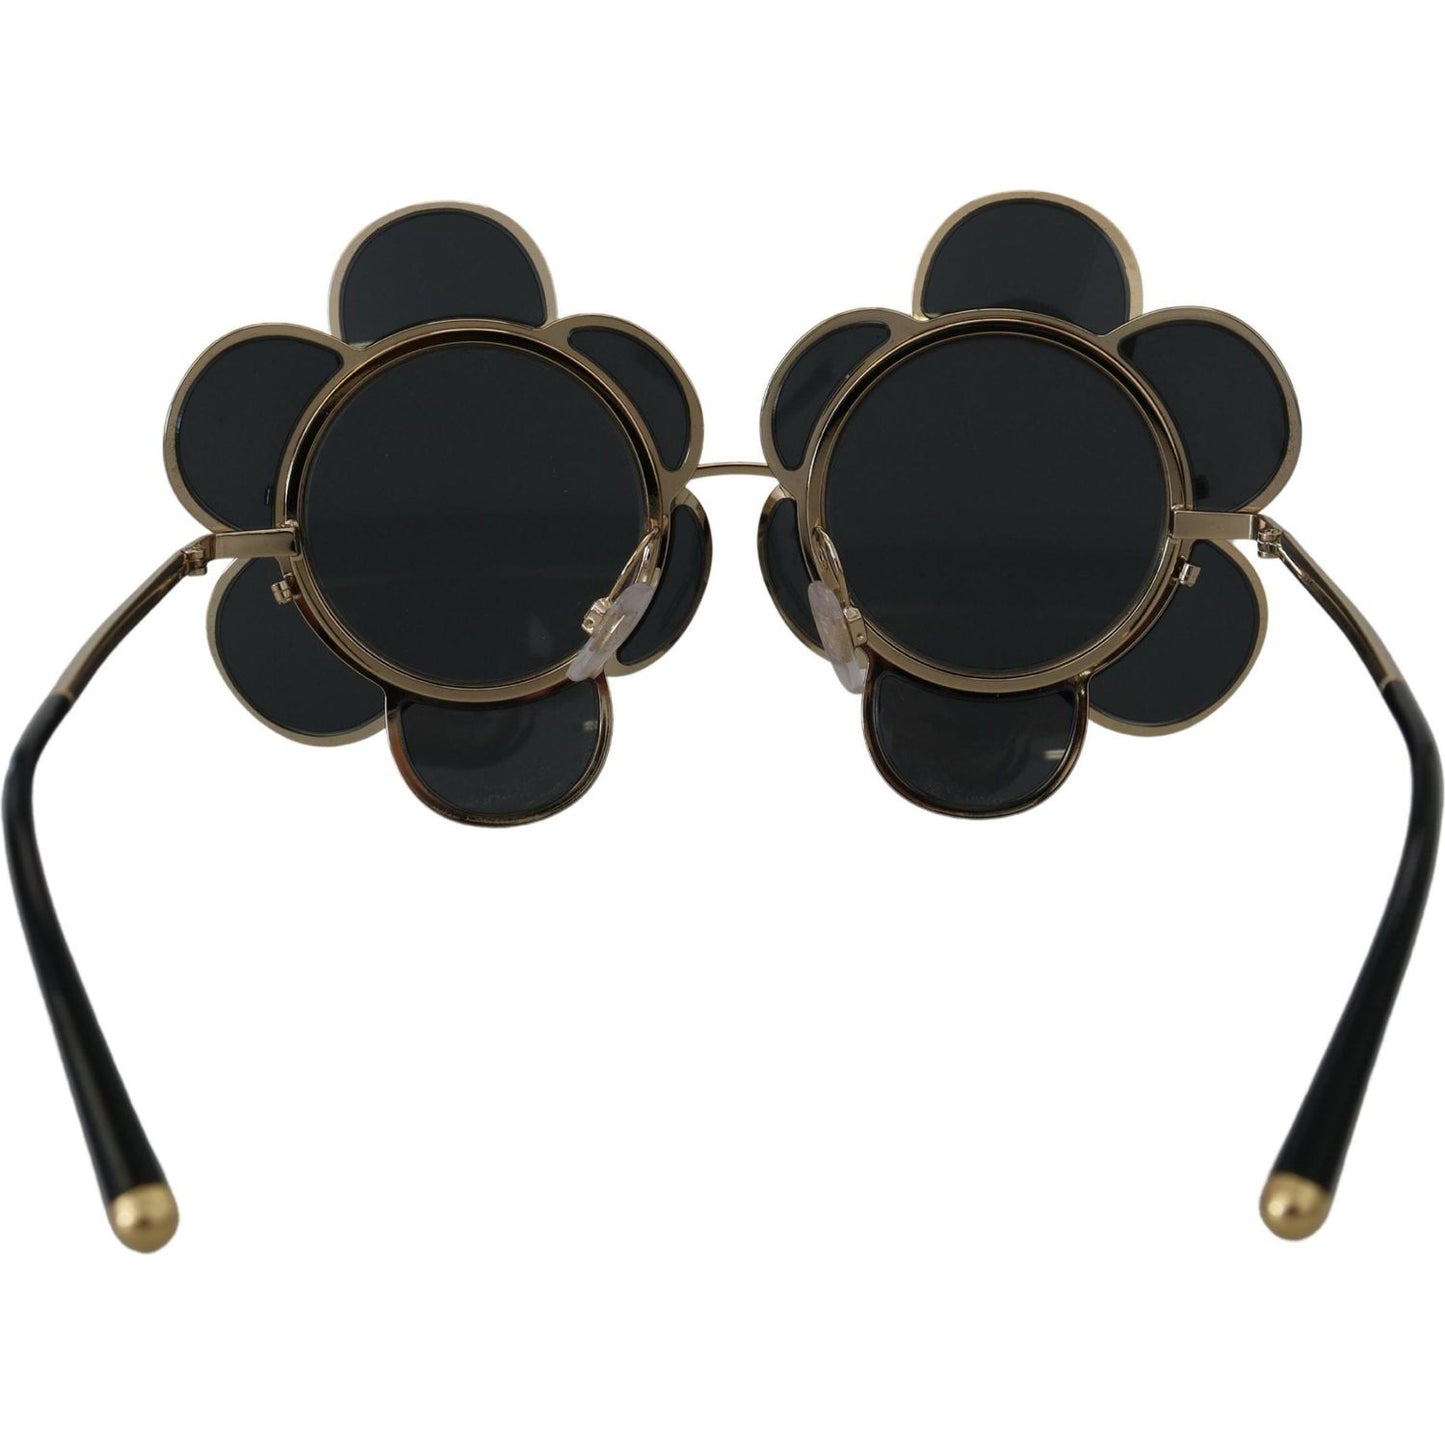 Dolce & Gabbana Chic Floral-Formed Black and Gold Sunglasses black-gold-special-edition-flower-form-dg2201-sunglasses